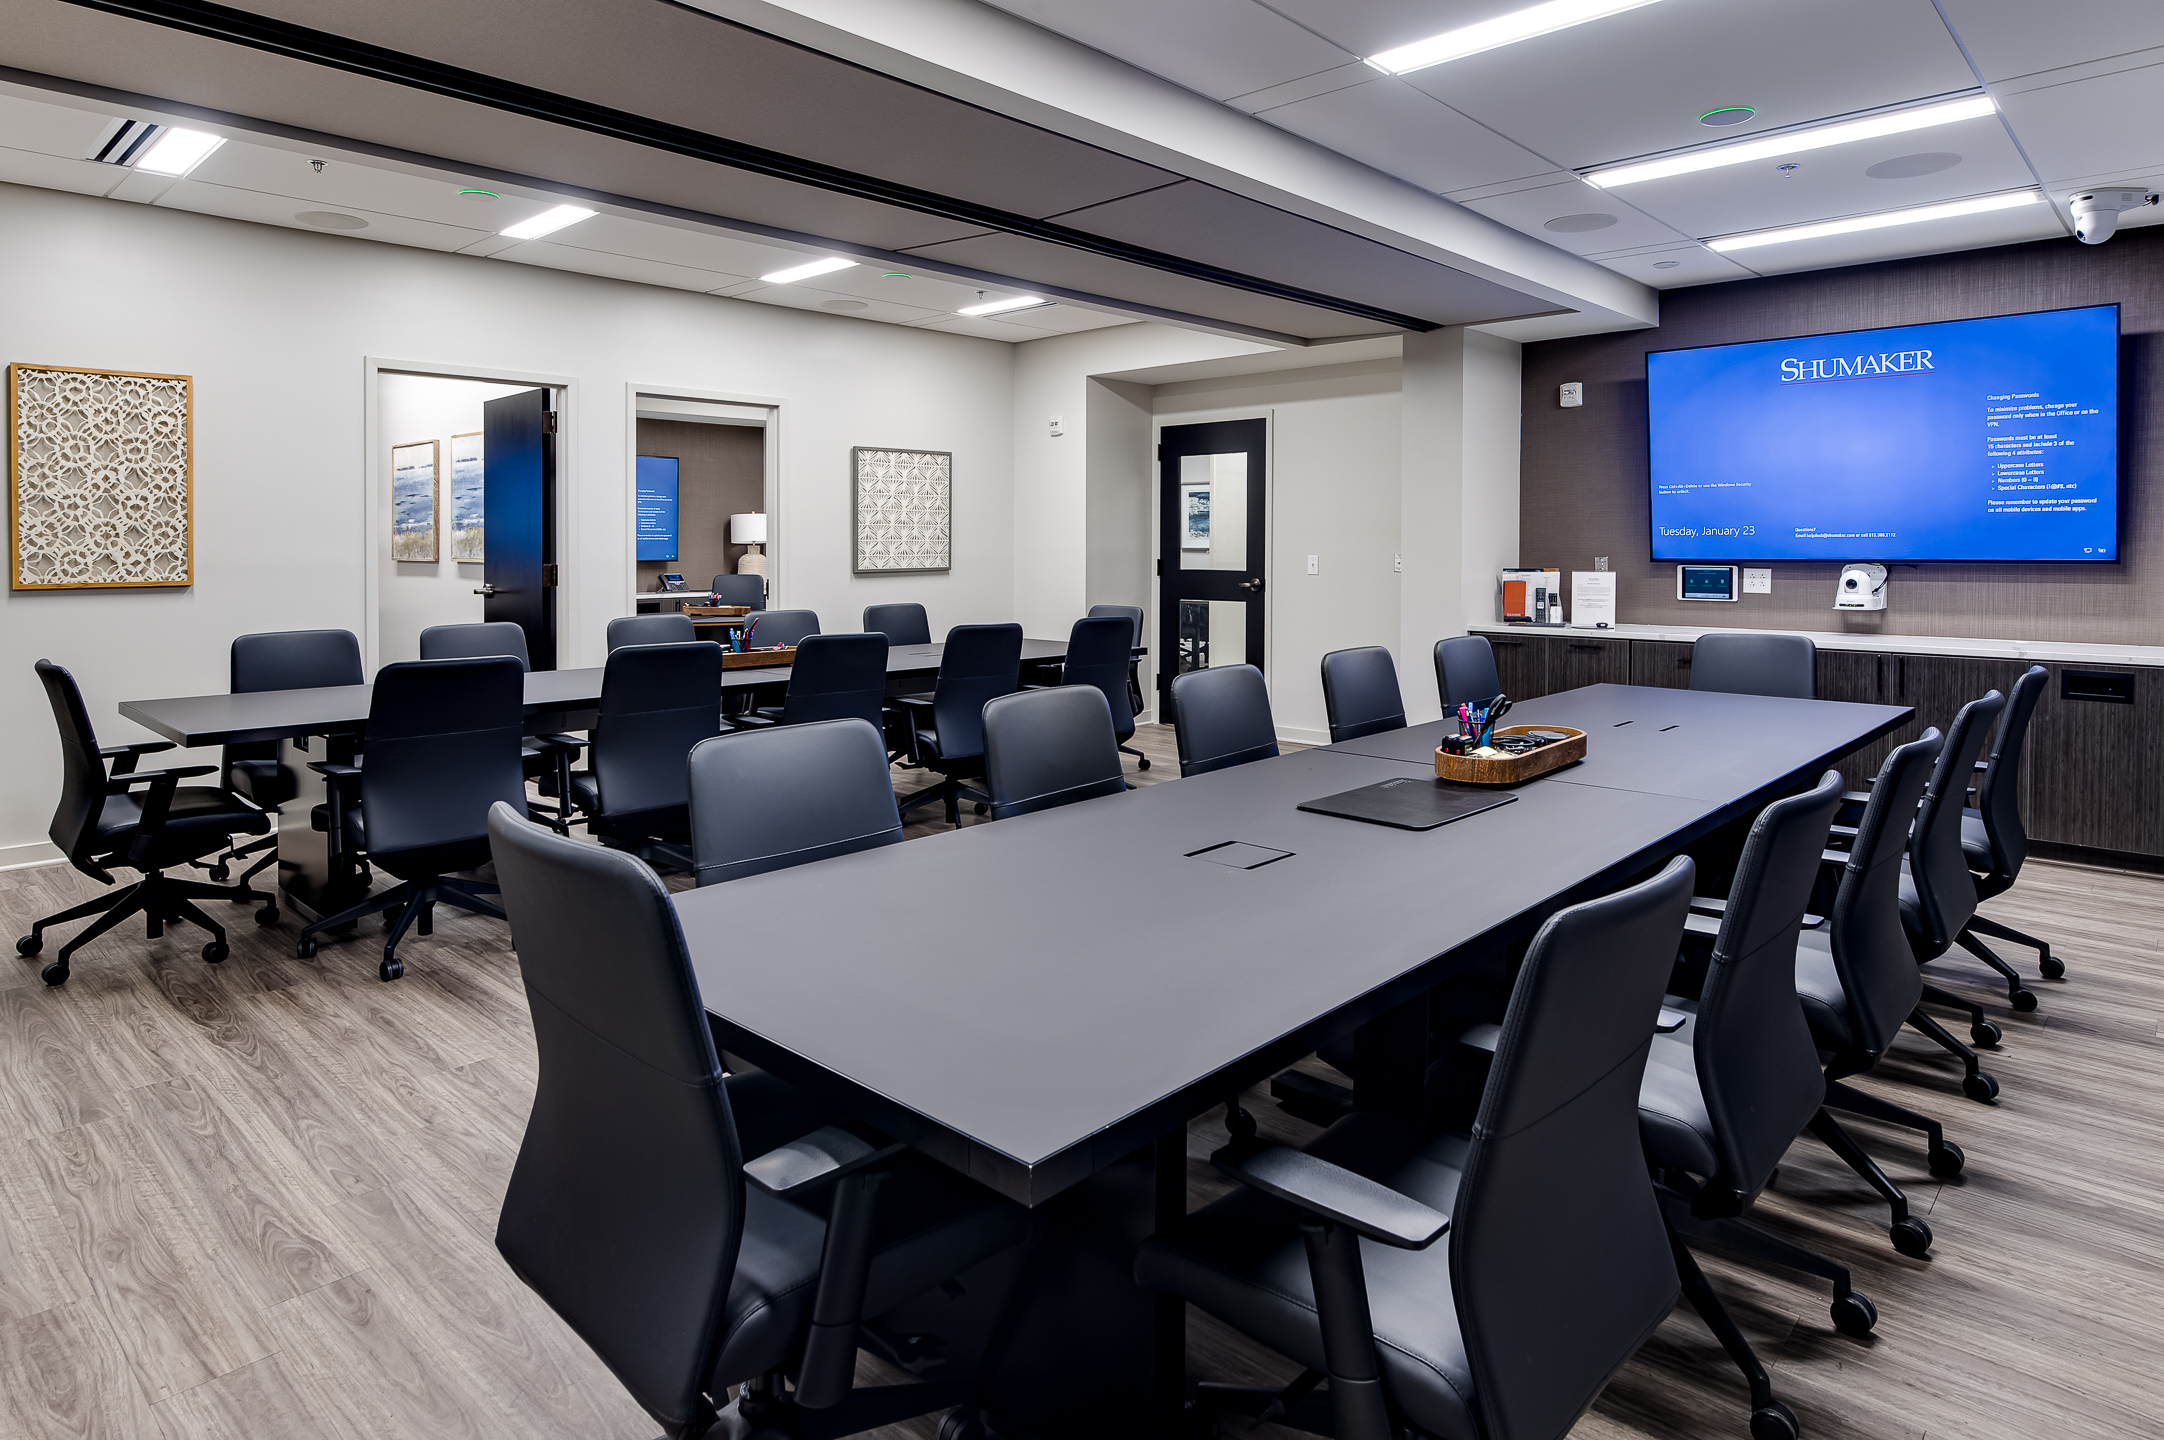 A conference room, complete with a spacious table and chairs. captured by professional architectural photographer